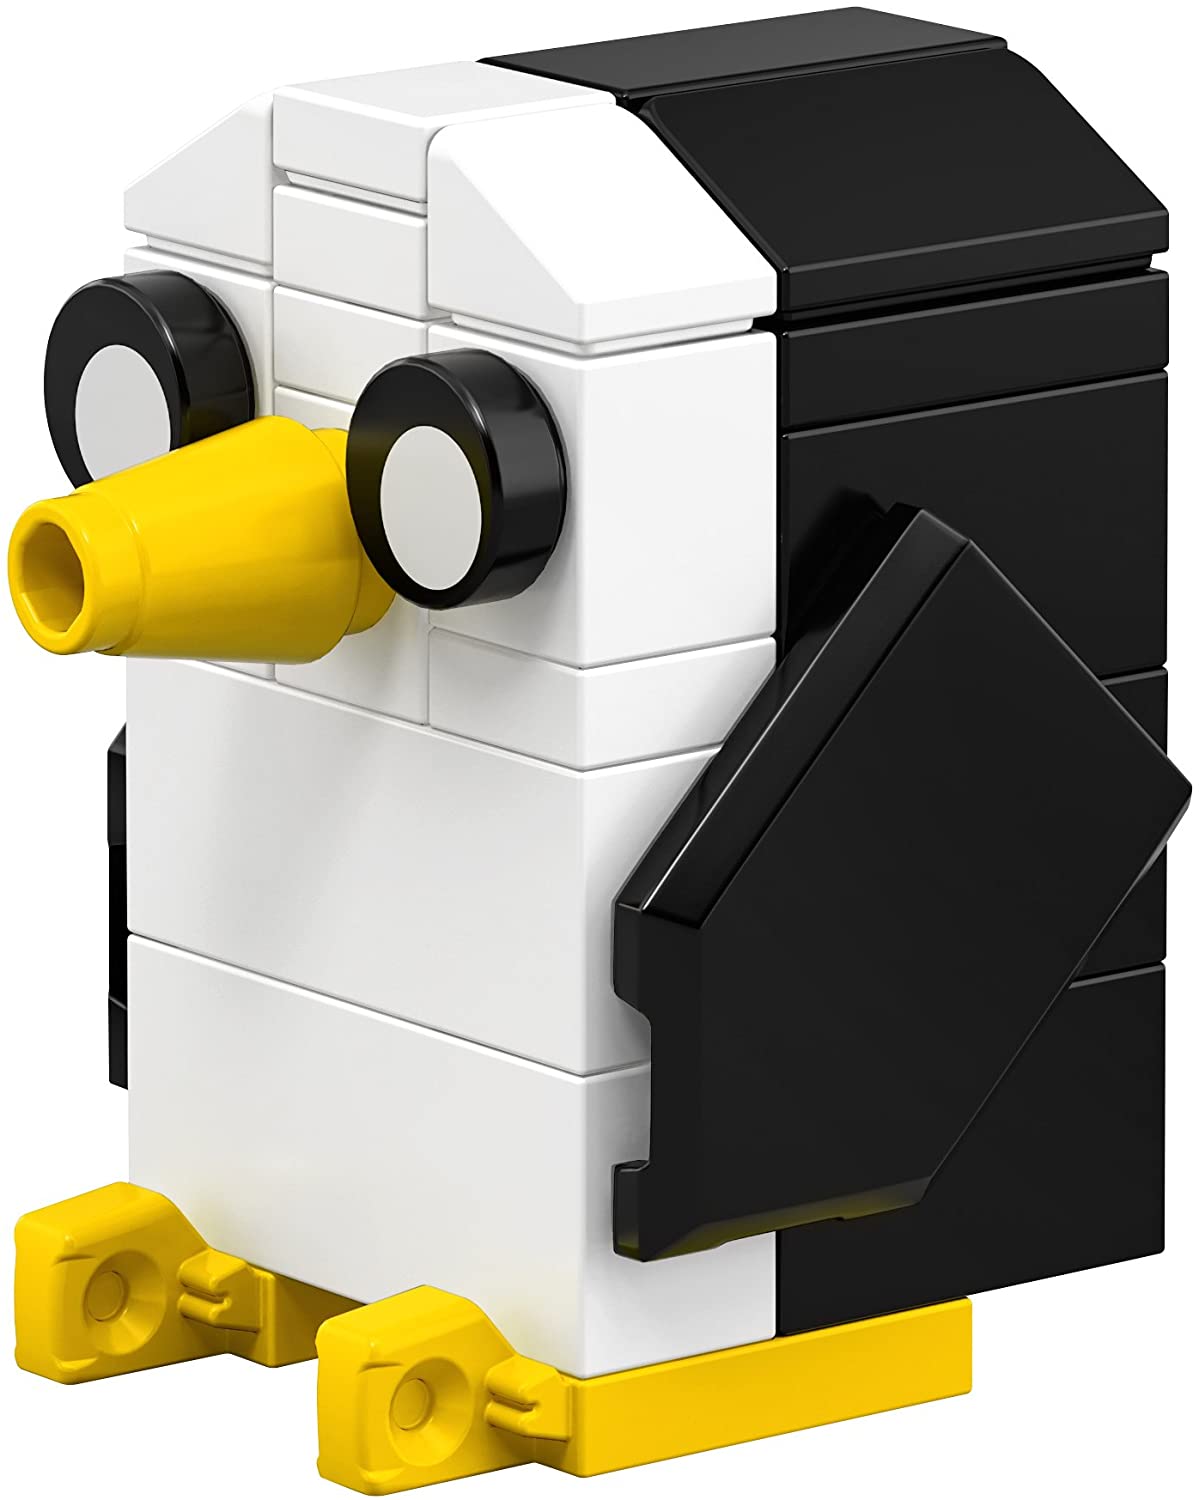 LEGO Ideas Adventure Time (21308) - Building Toy and Popular Gift for Fans of LEGO Sets and Cartoon Network - One Shop Online Toys in Pakistan